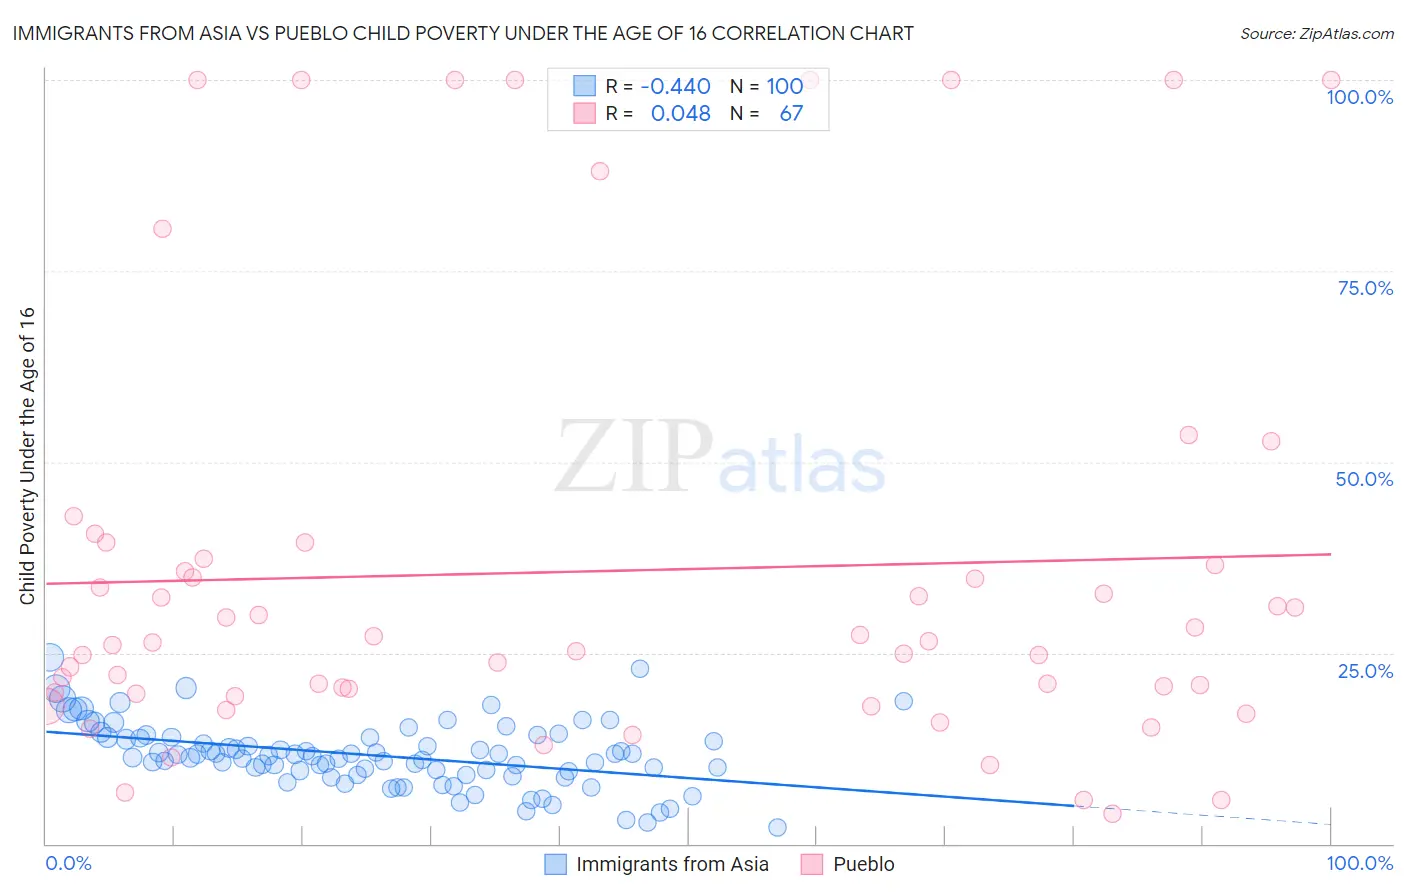 Immigrants from Asia vs Pueblo Child Poverty Under the Age of 16